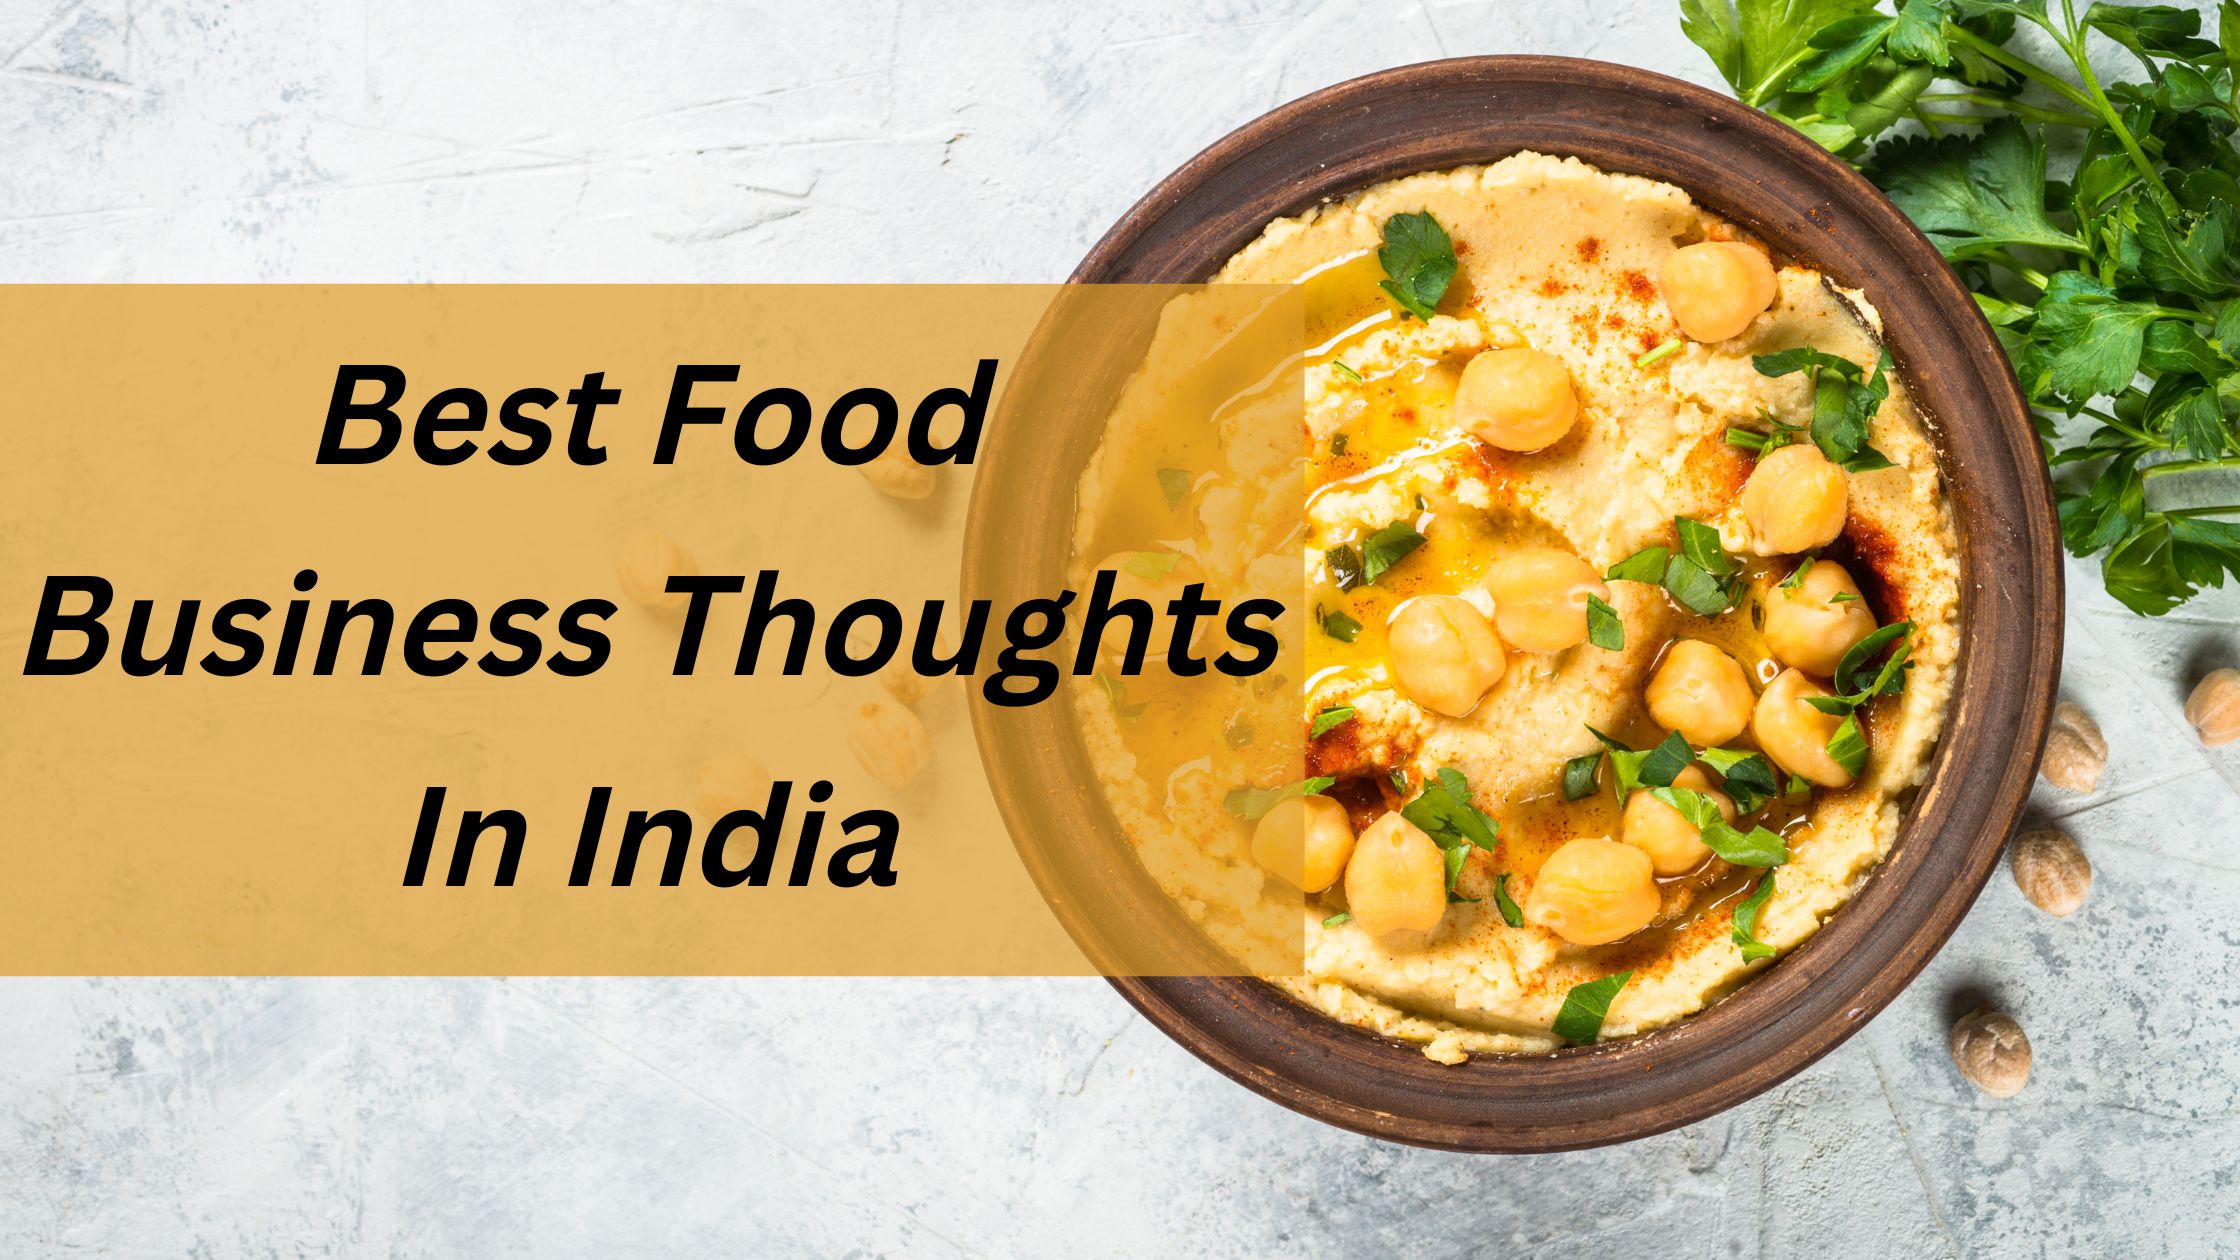 Best Food Business Thoughts In India